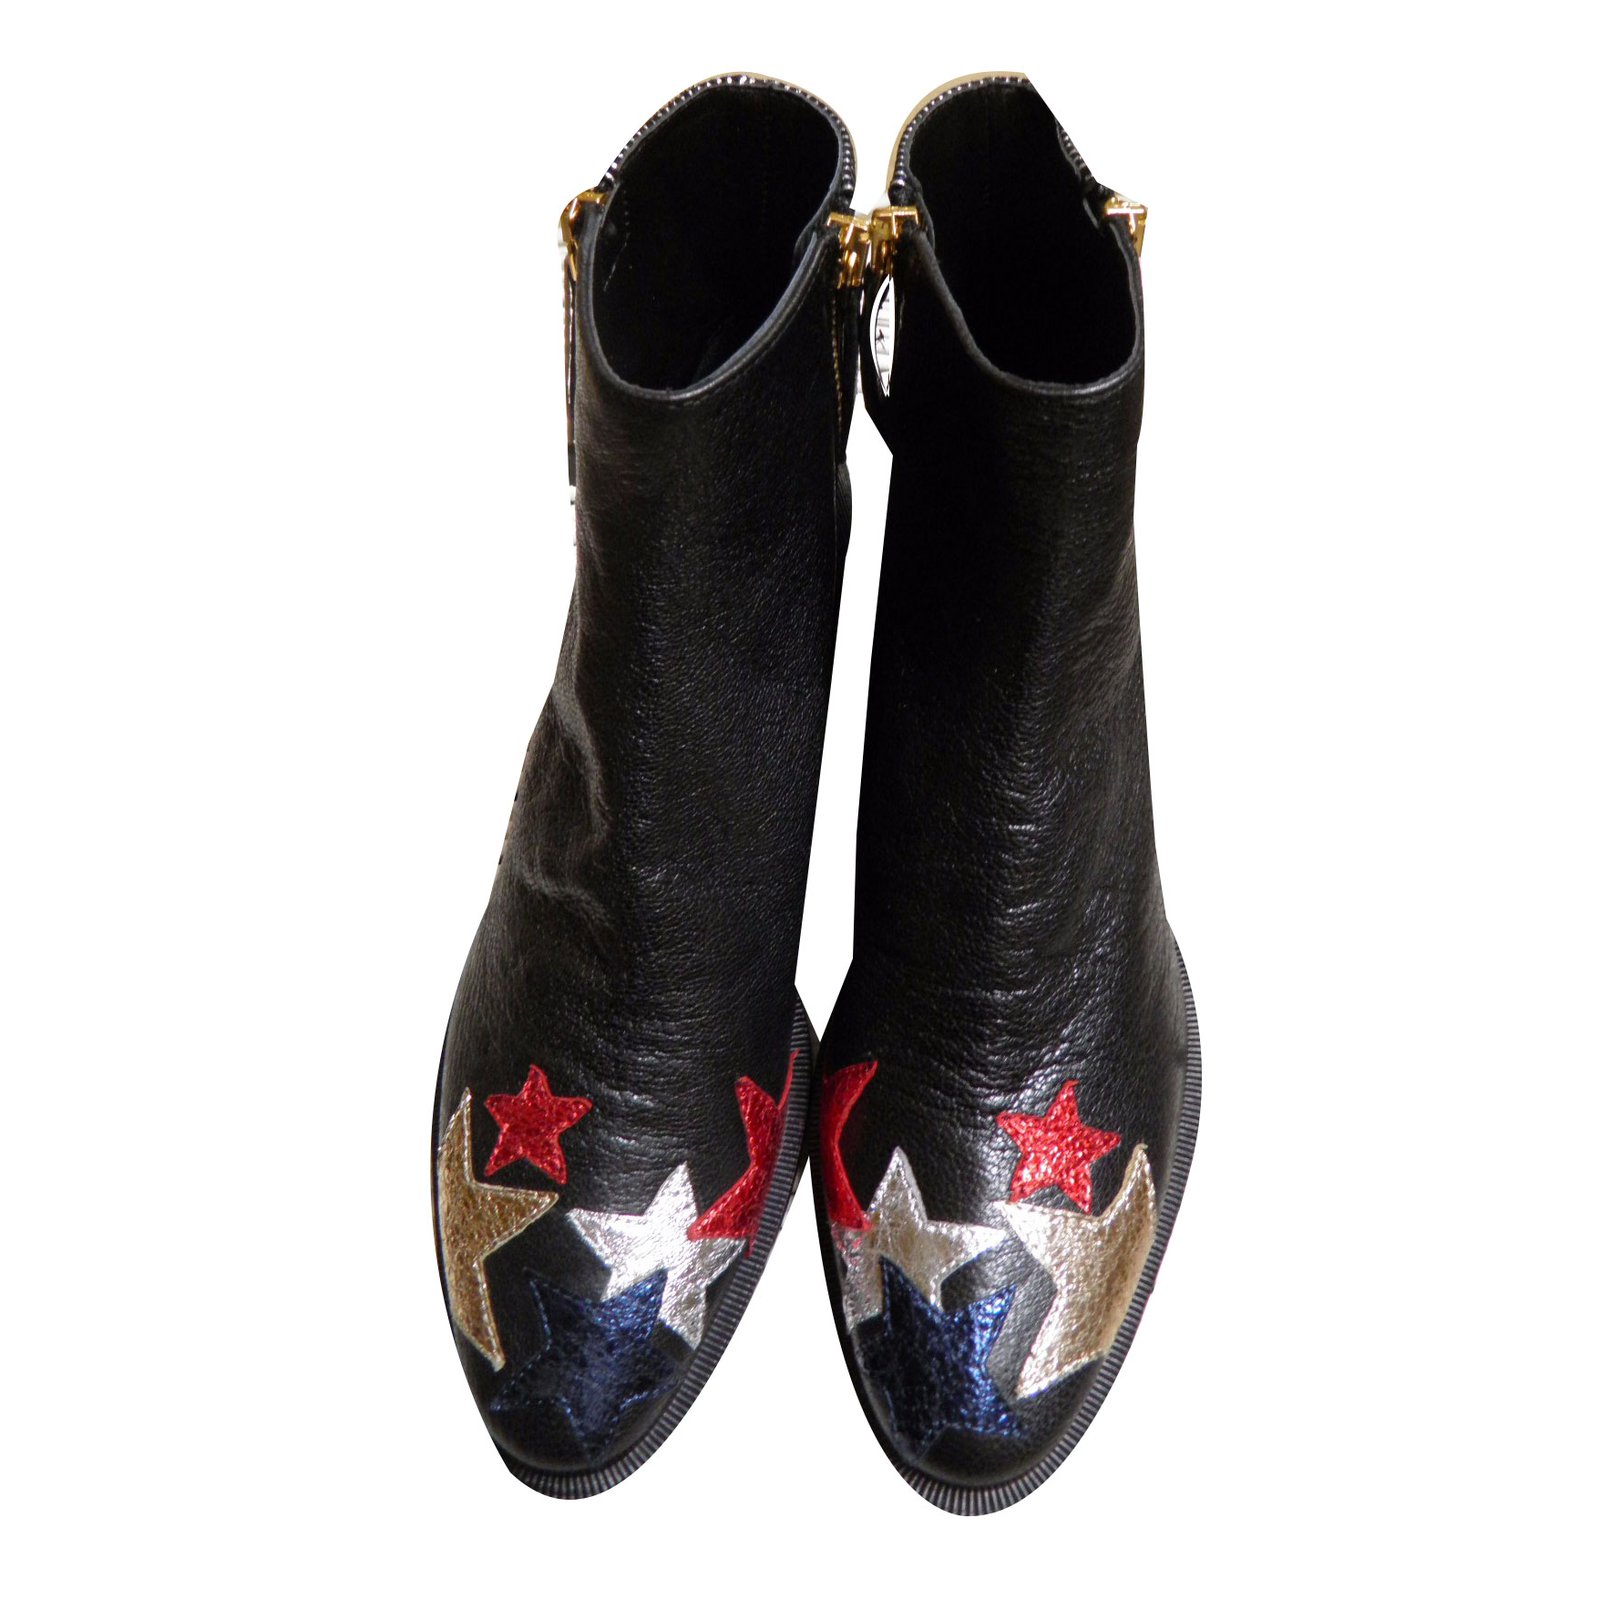 ankle boots with stars on them